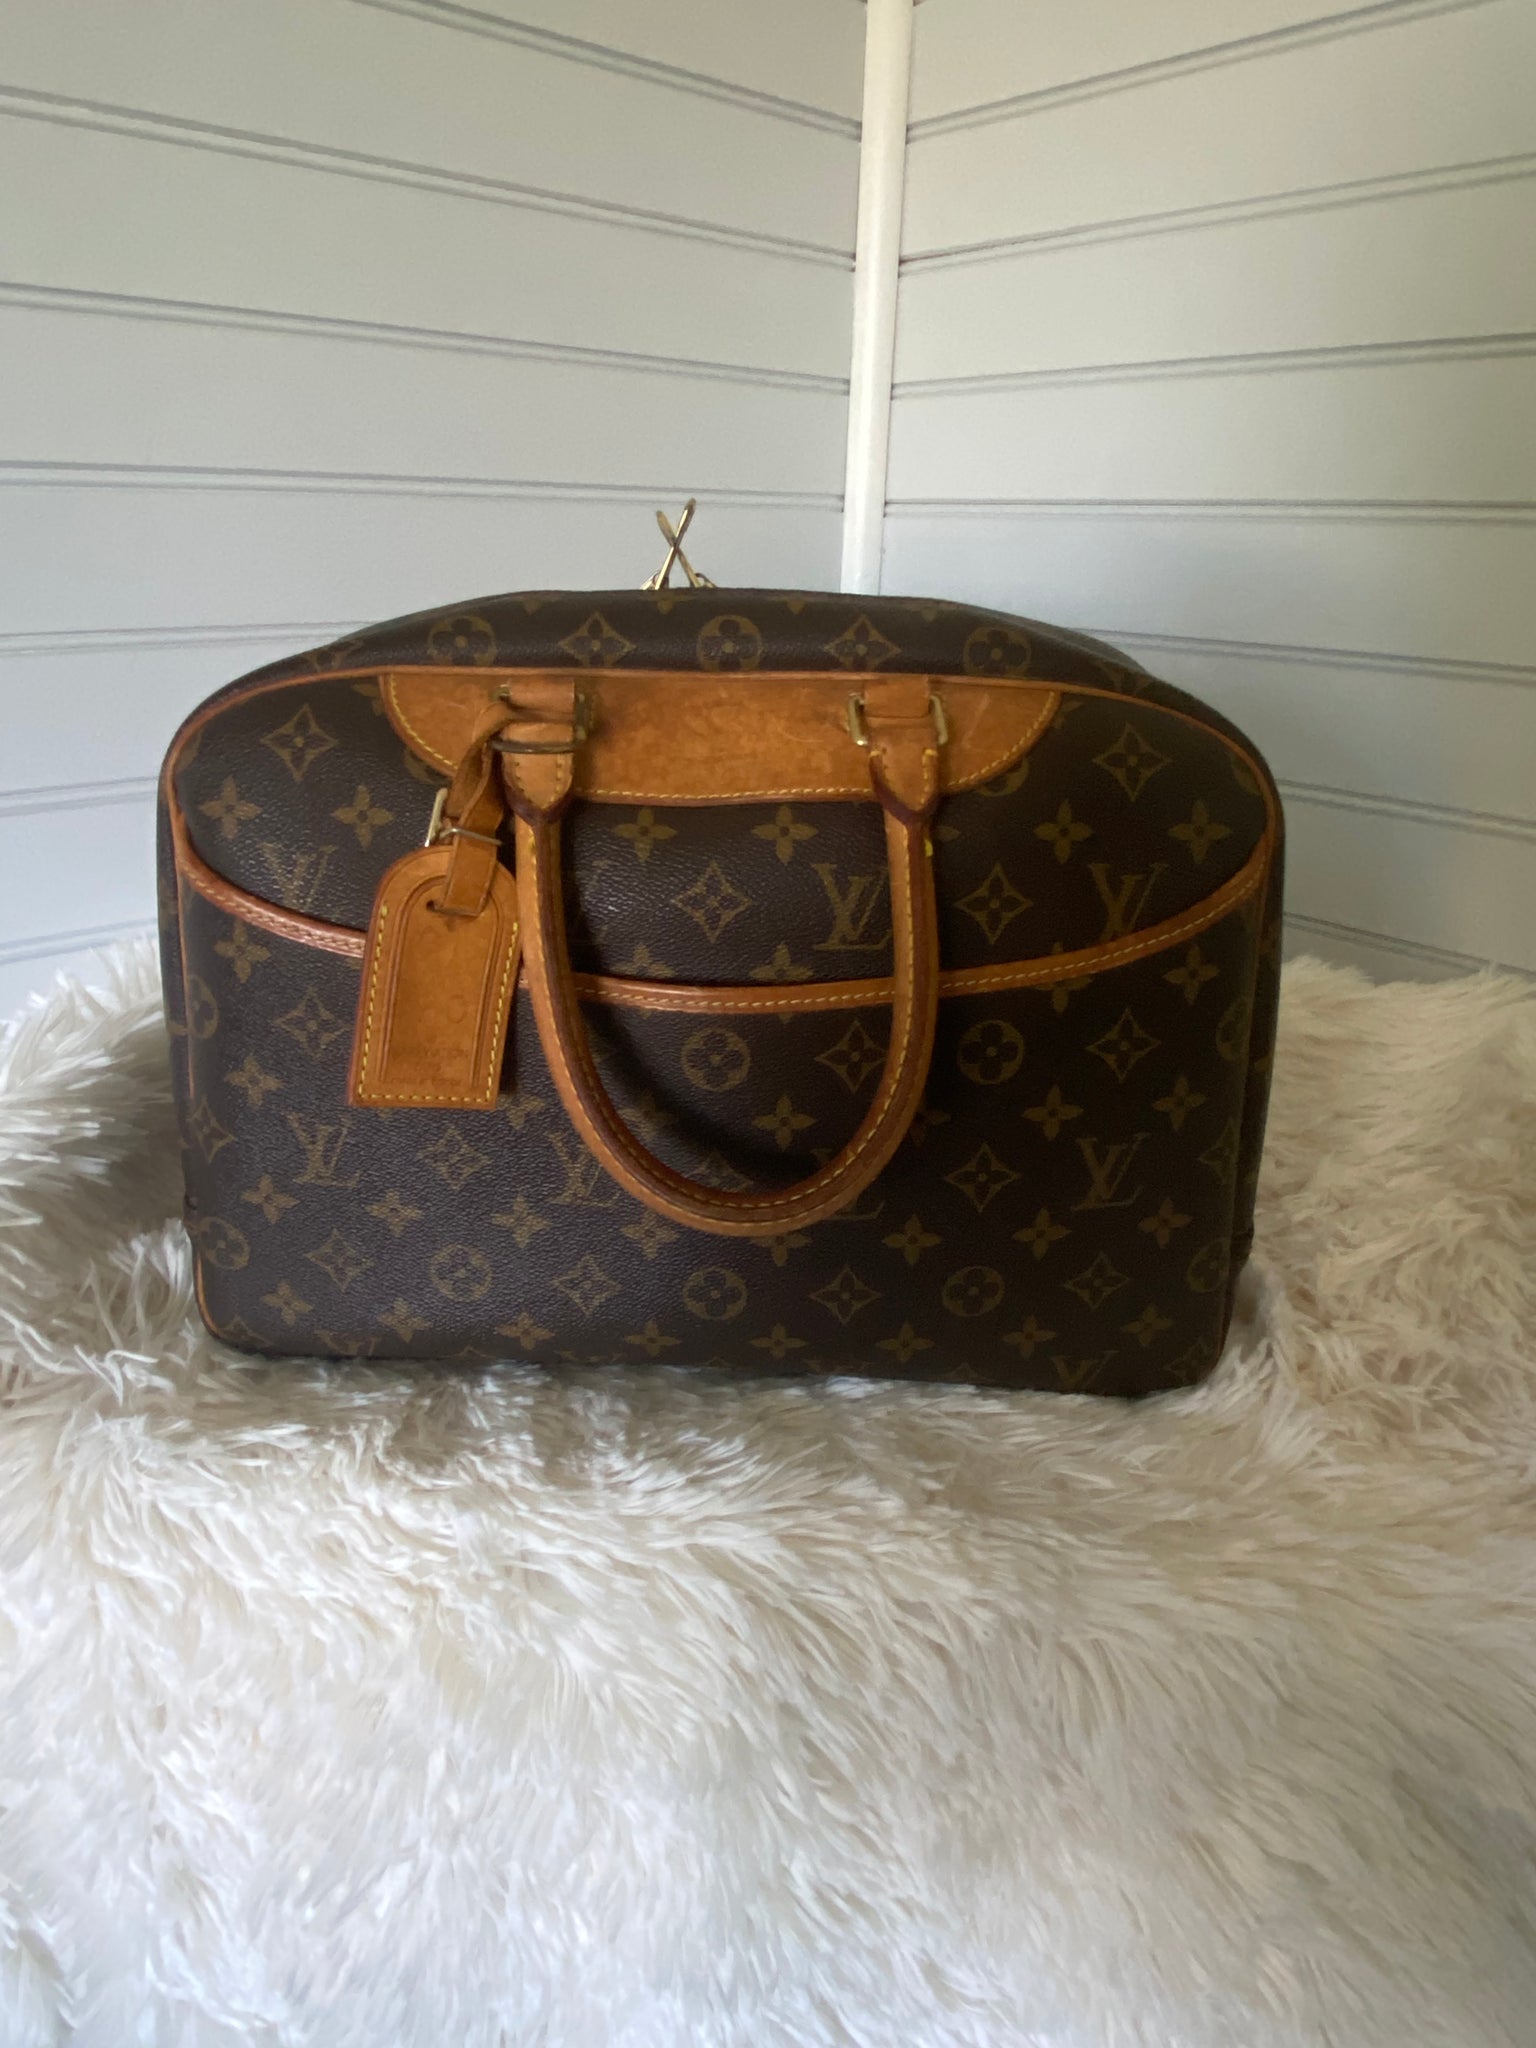 Louis Vuitton Monogram Deauville Bag with Luggage Tag